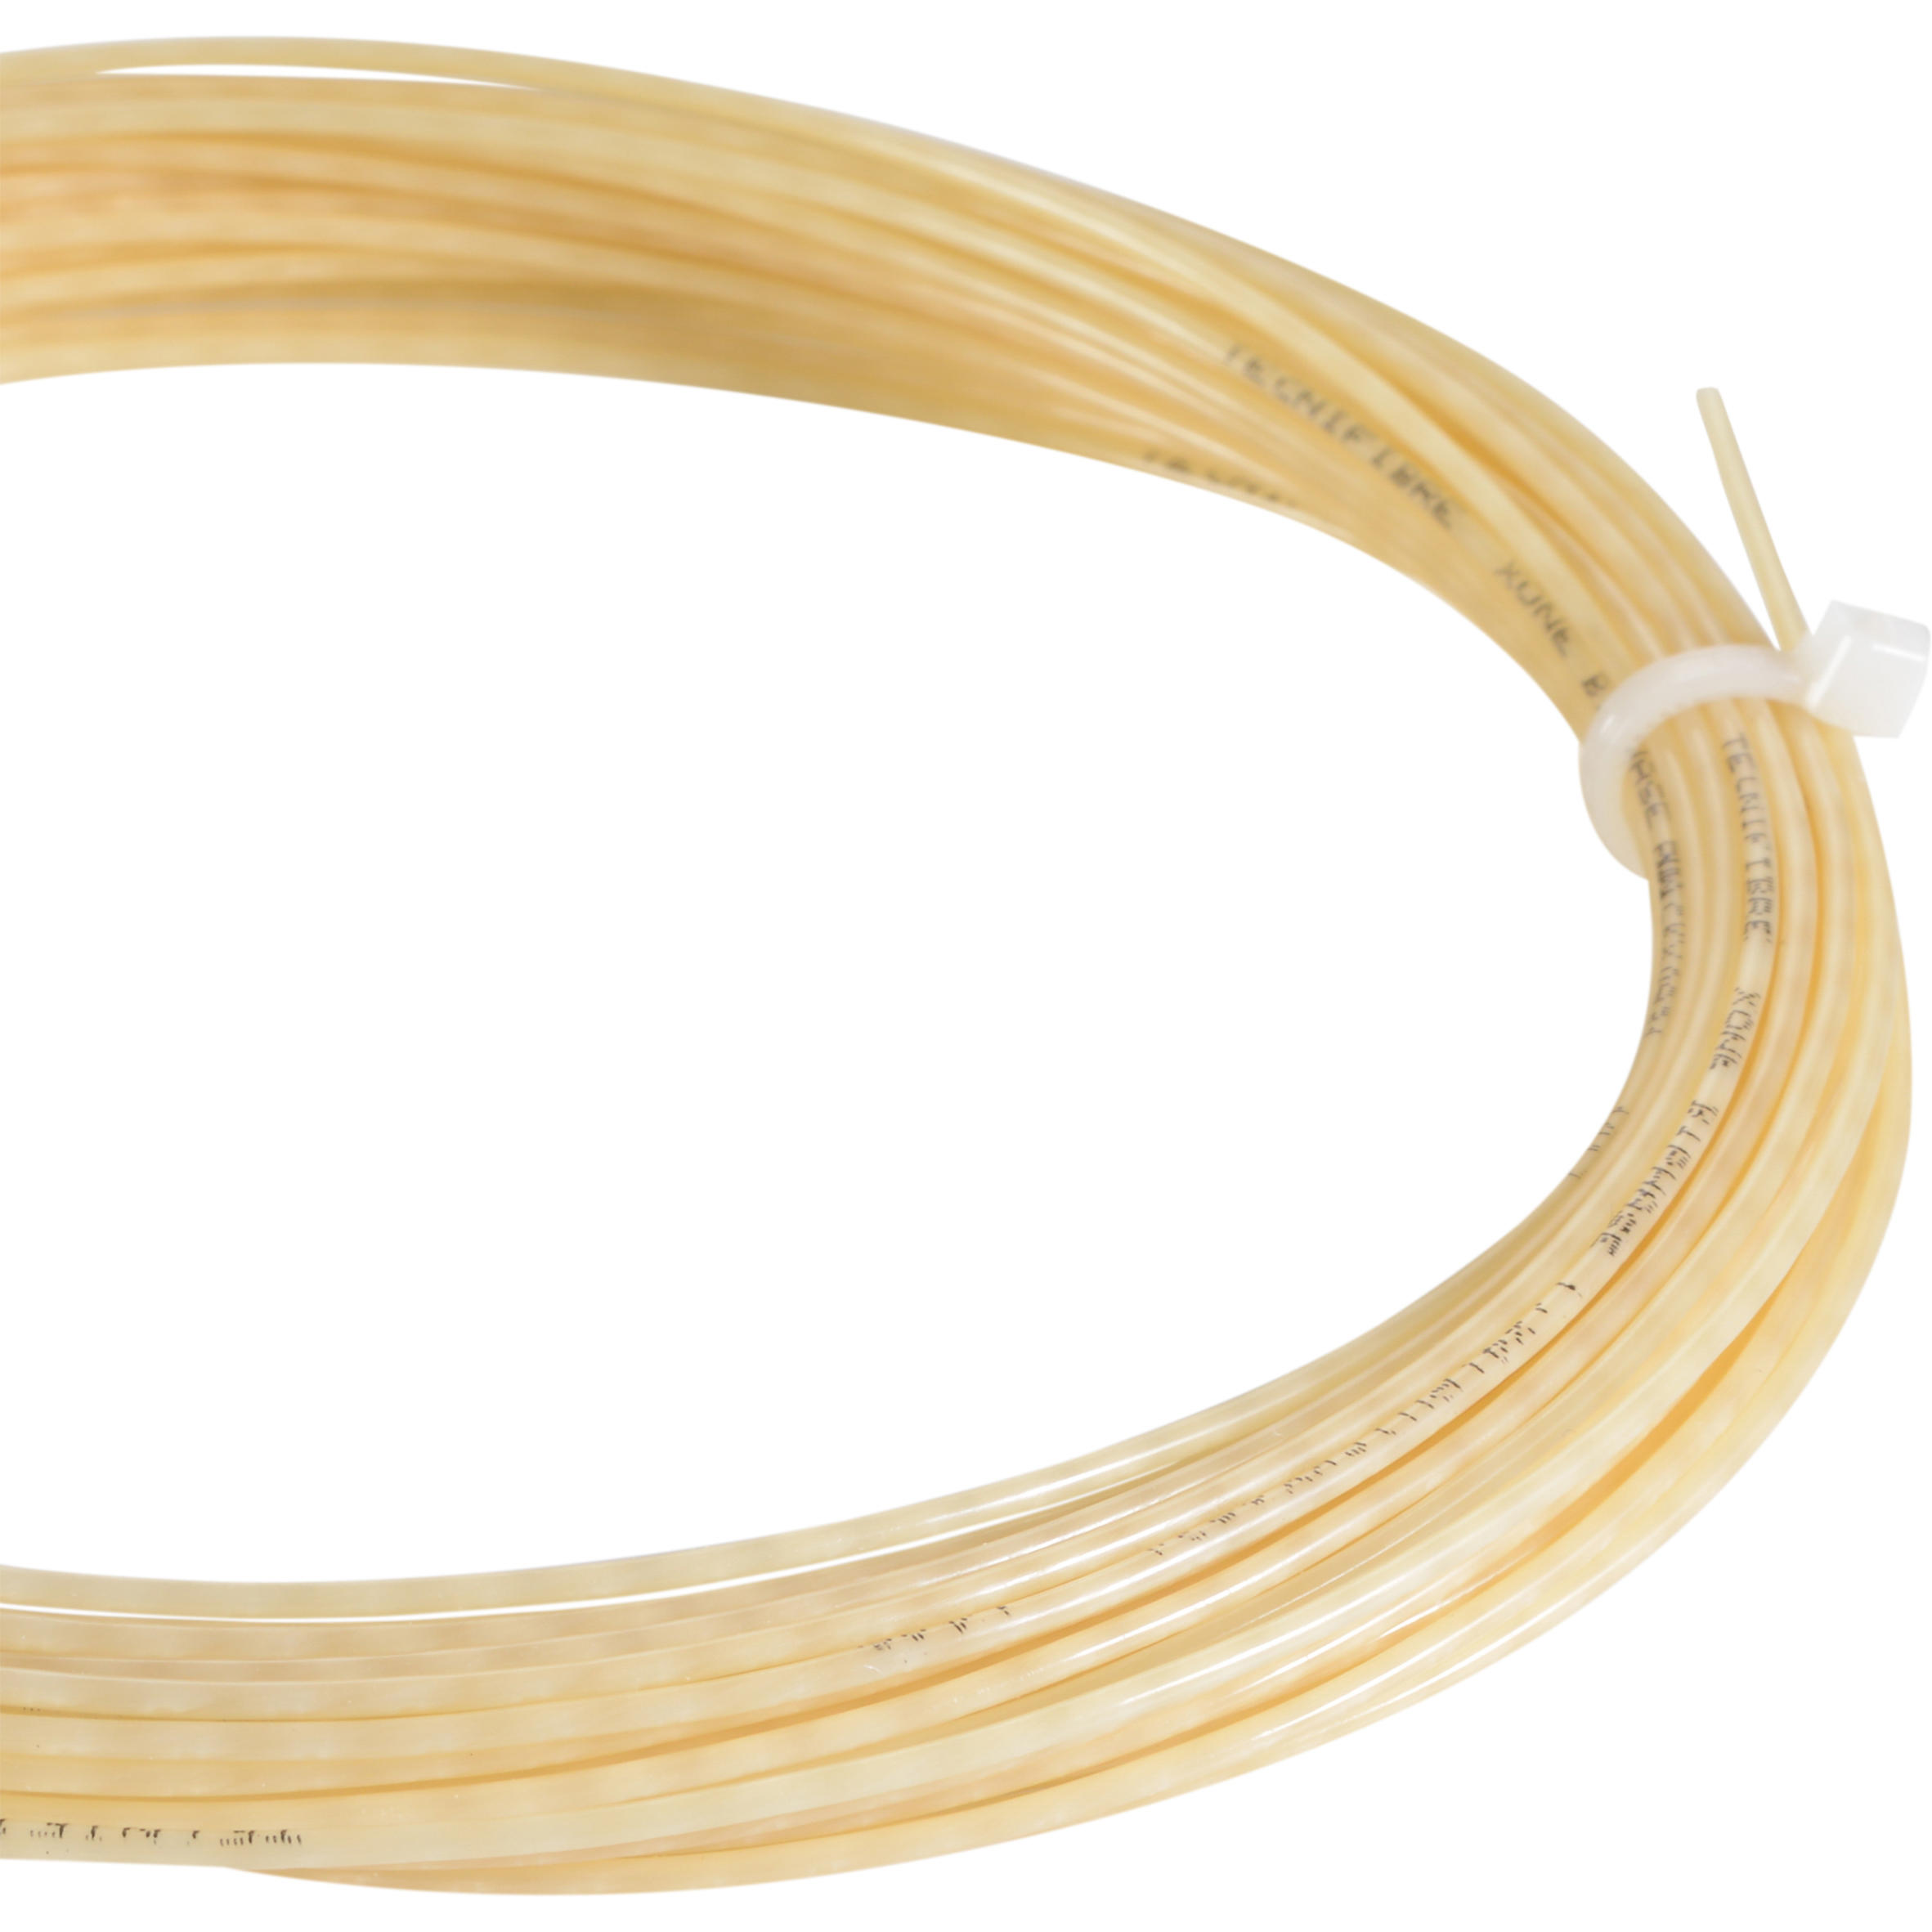 X-One Biphase 1.24 mm Multifilament Tennis String - Natural 3/3